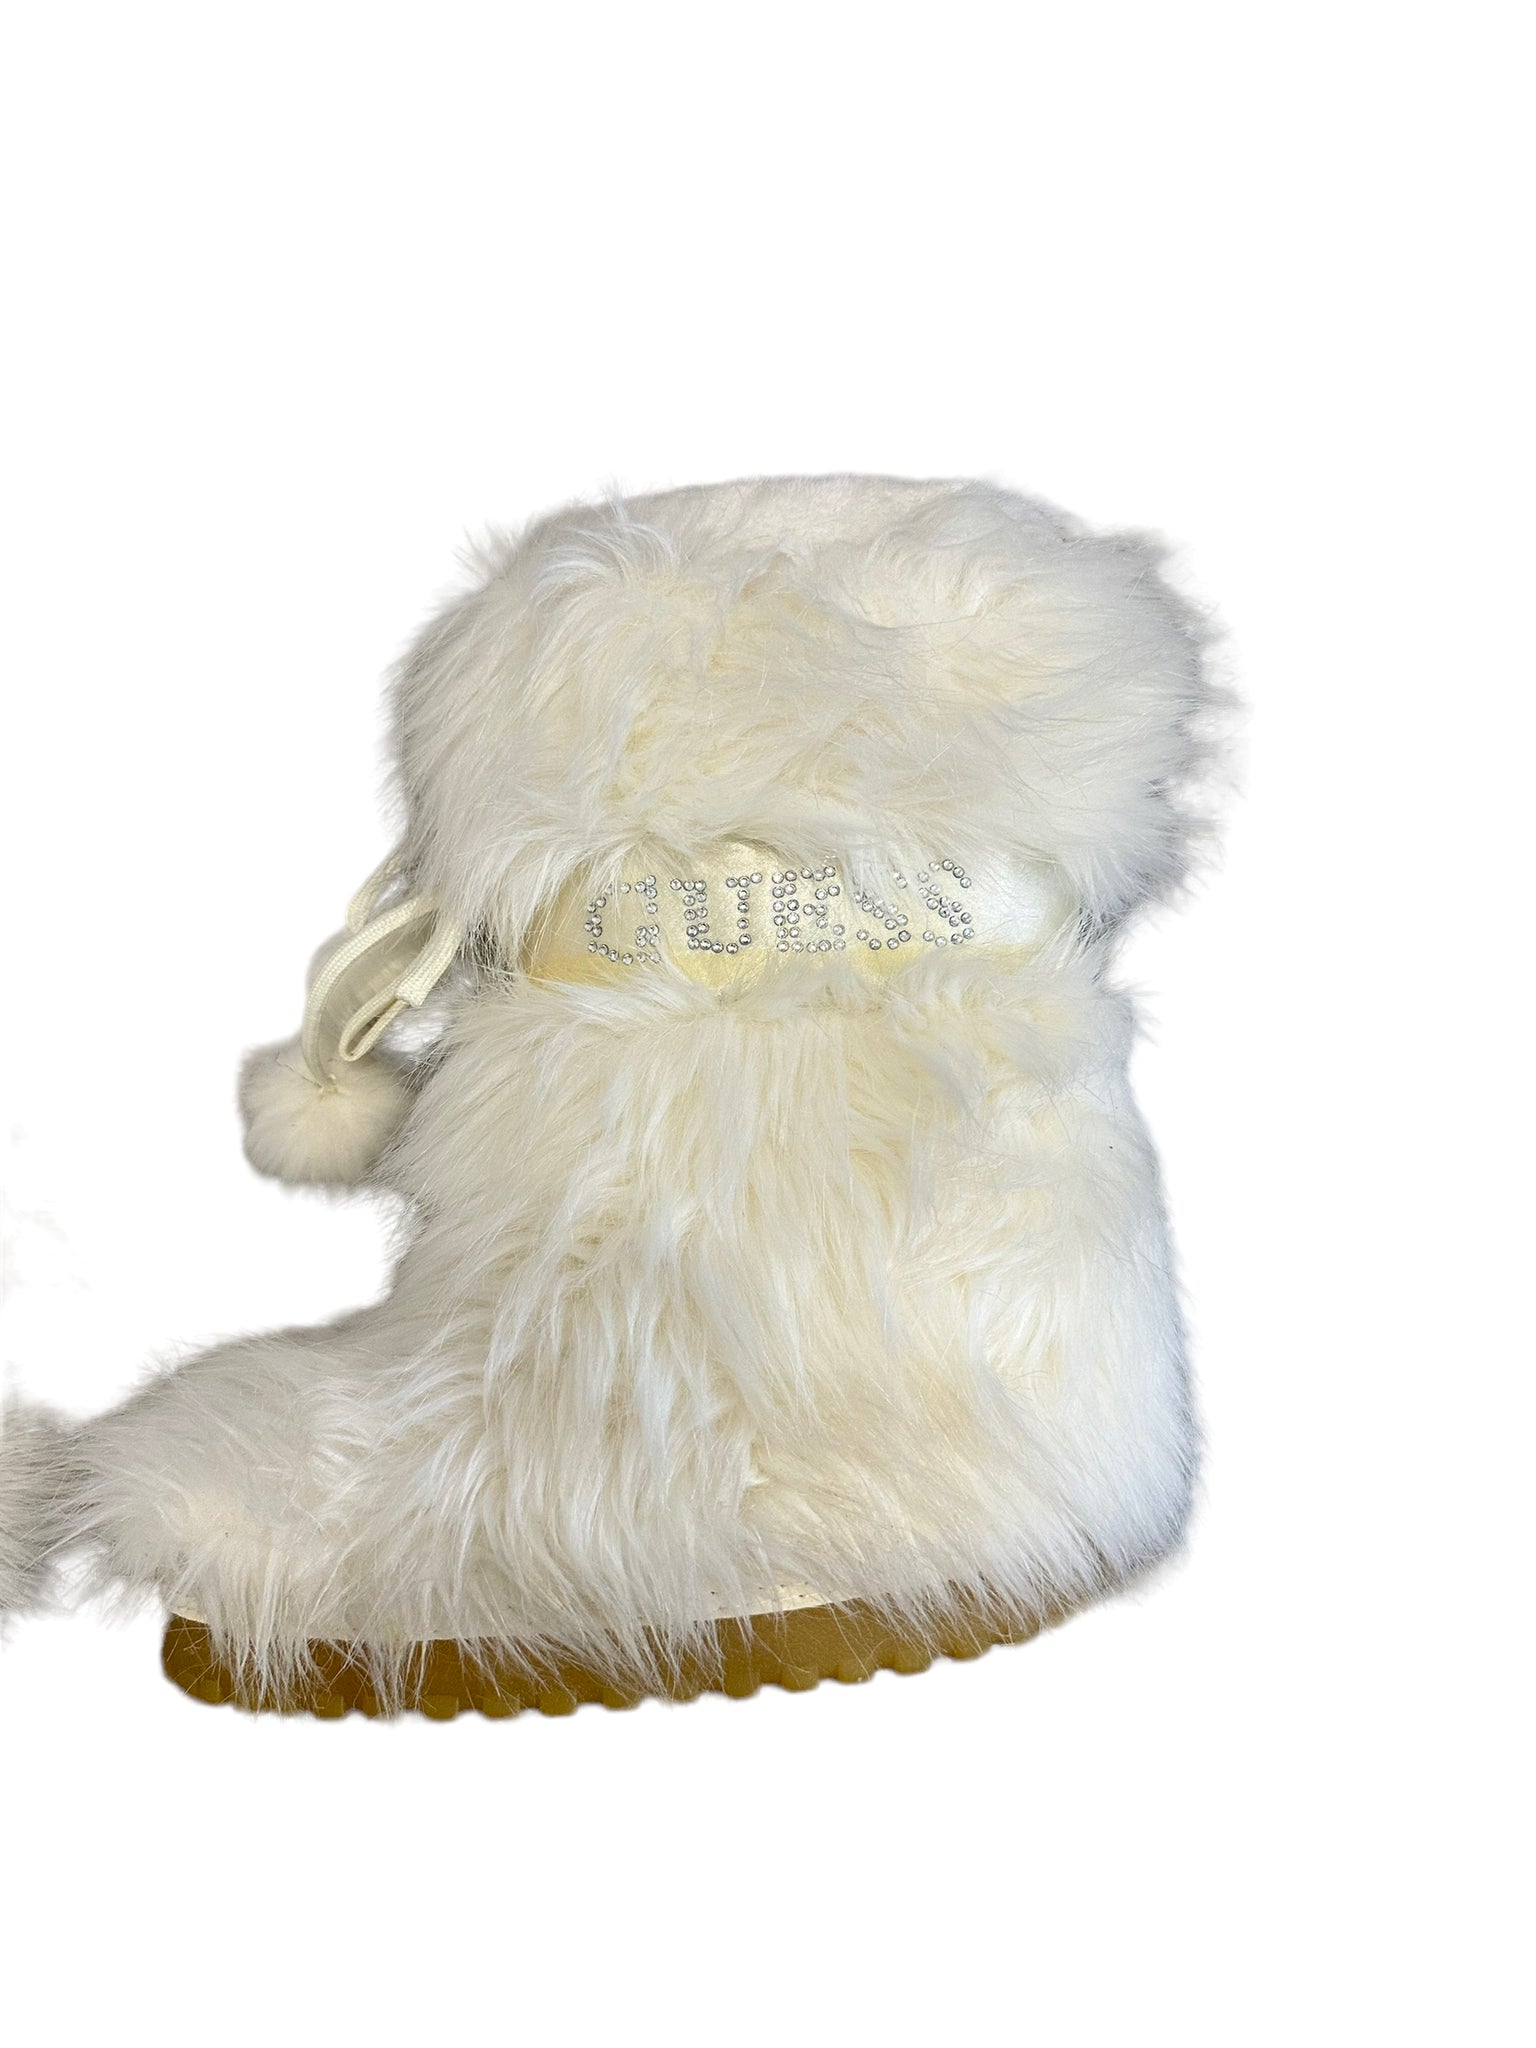 Guess White Fur Boots